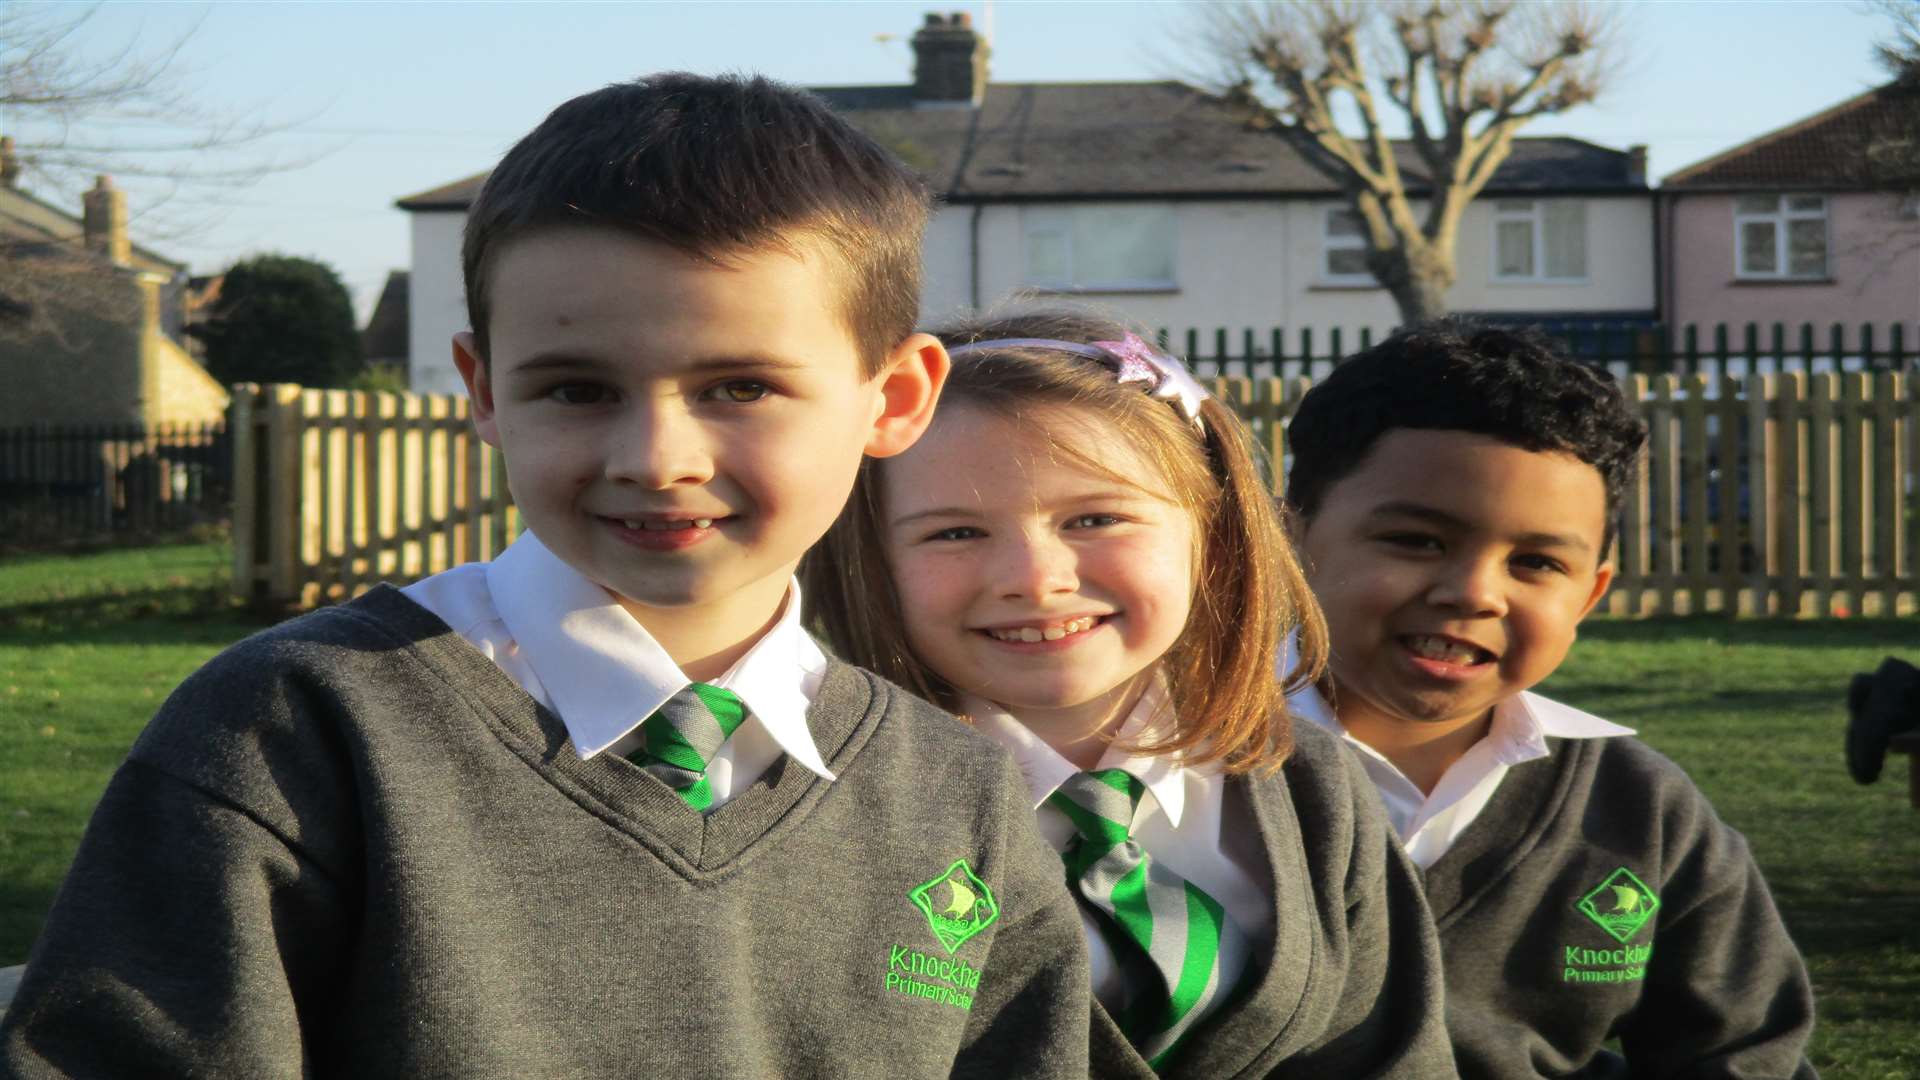 Pupils at Knockhall Primary School were planning to create an eco garden